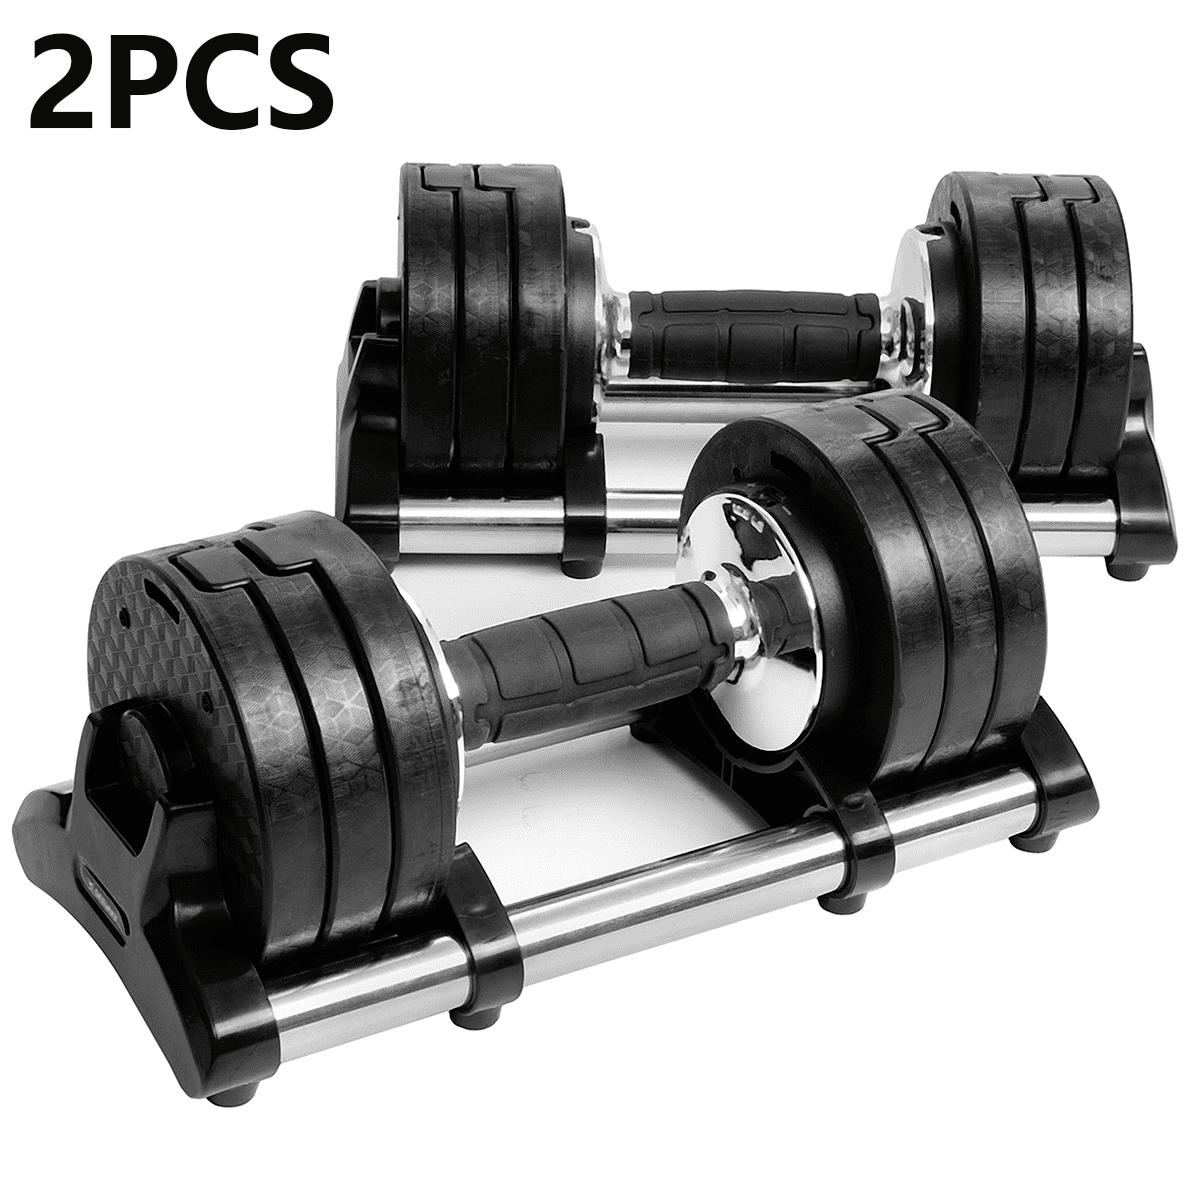 Details about   12.5kg Hex Exercise Dumbbell Home Gym Workout Fitness Equipment No Scrolling 